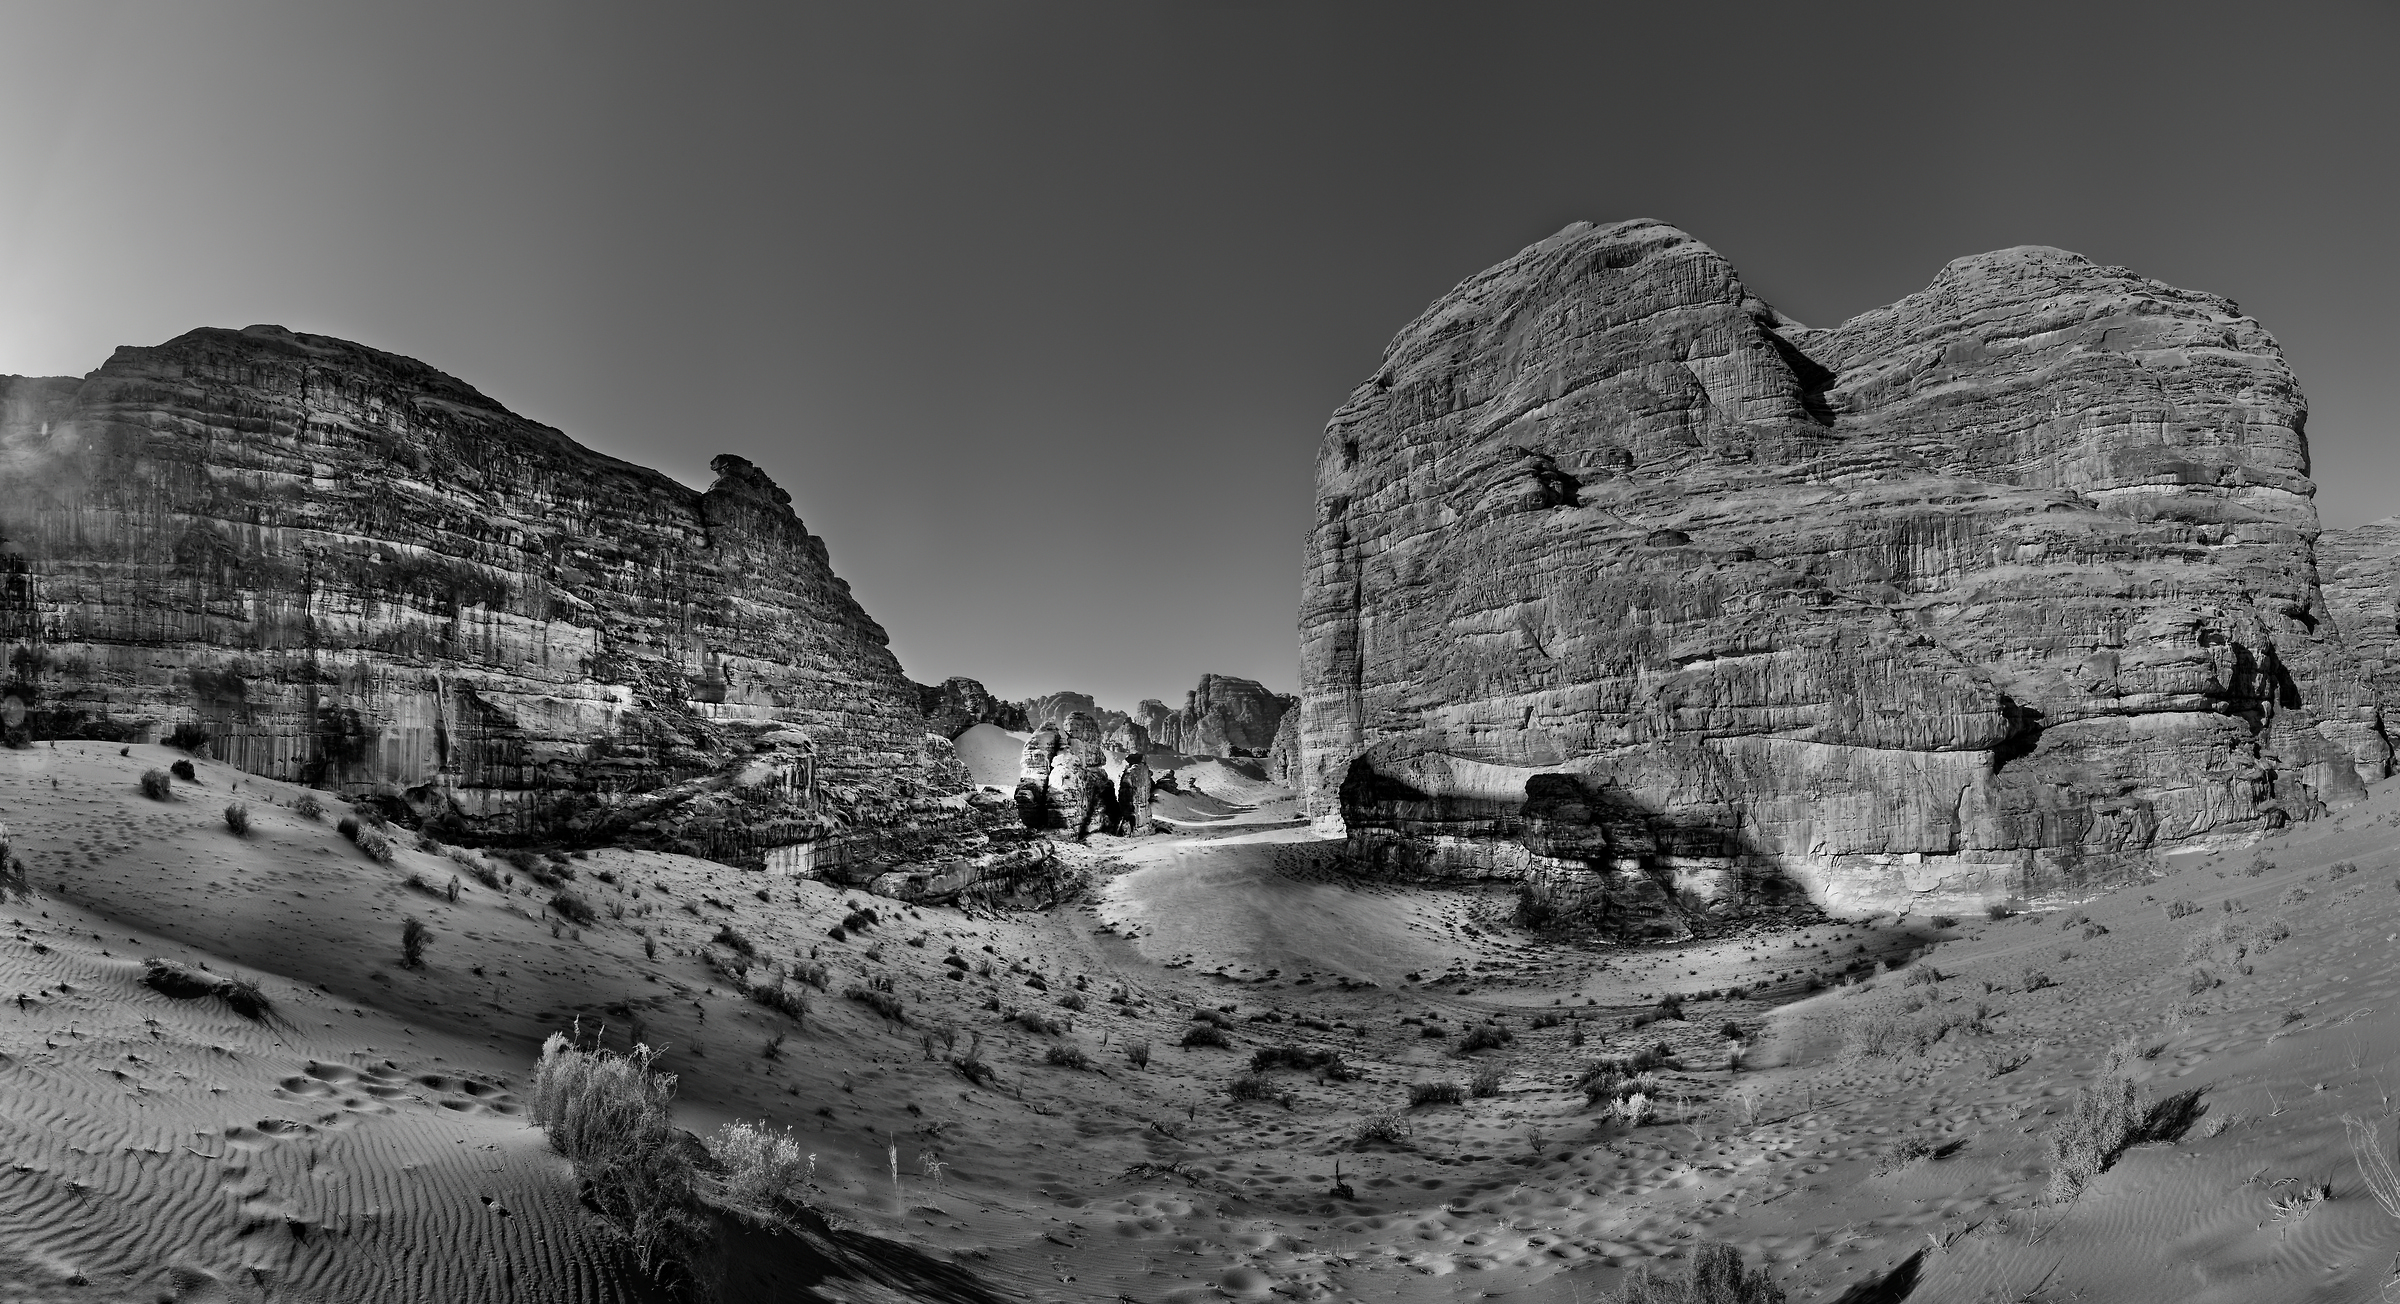 824 megapixels! A very high resolution, large-format VAST photo print of a rock formation in the desert; black & white fine art photograph created by Peter Rodger in Tabuk, Saudi Arabia.